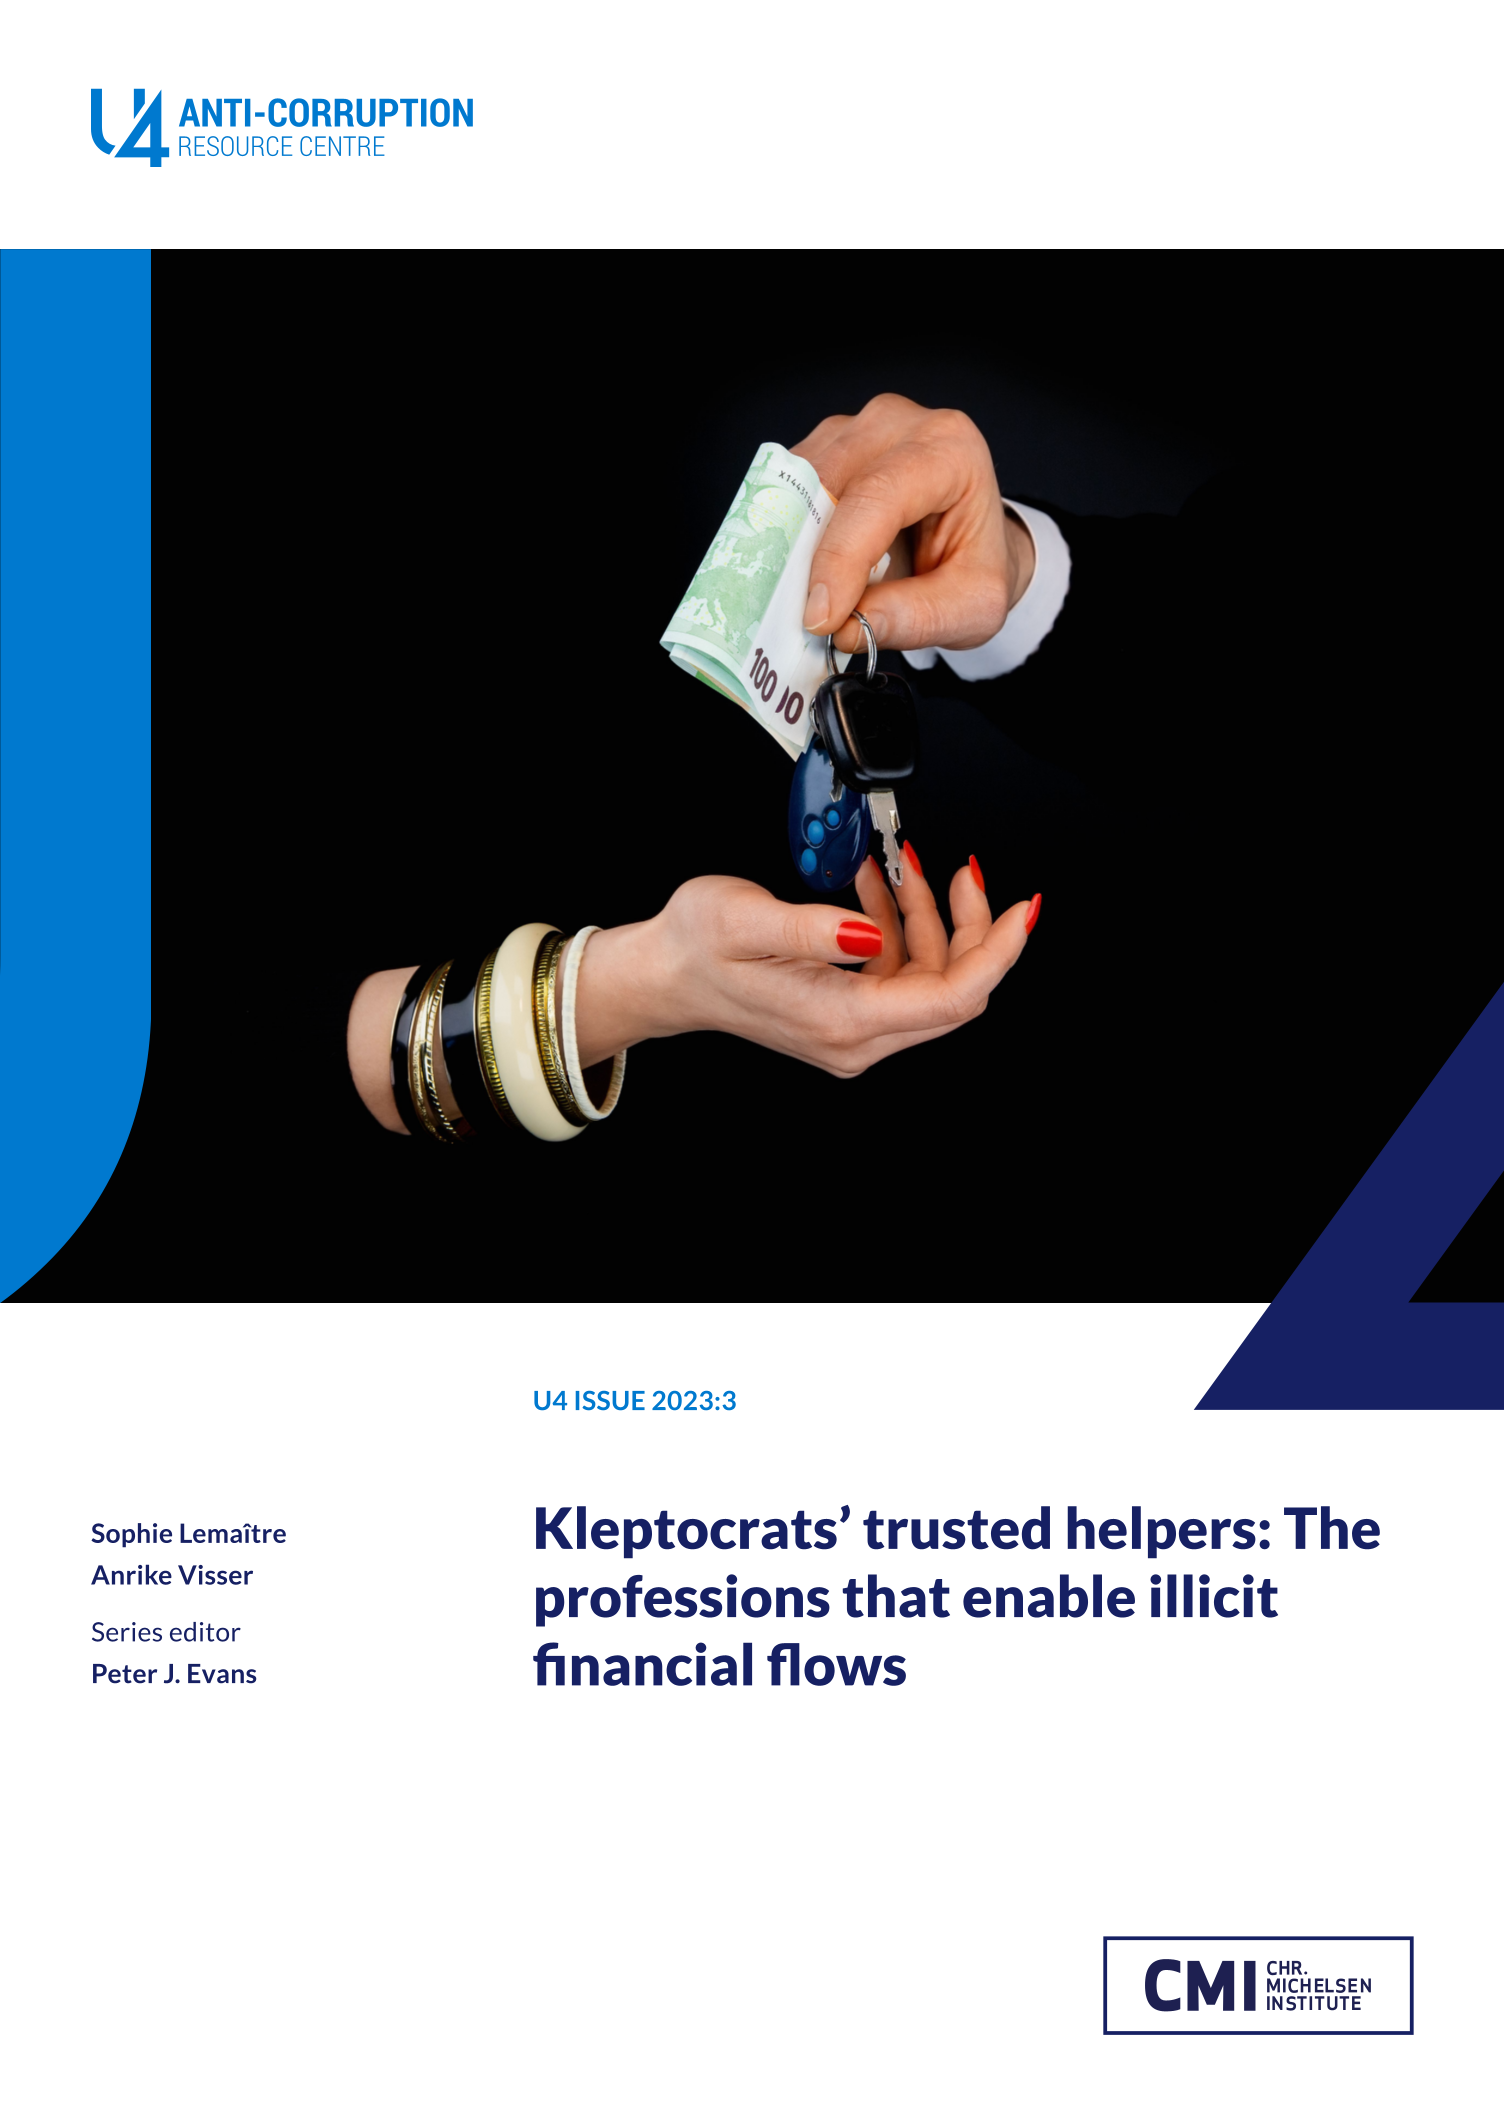 Kleptocrats’ trusted helpers: The professions that enable illicit financial flows